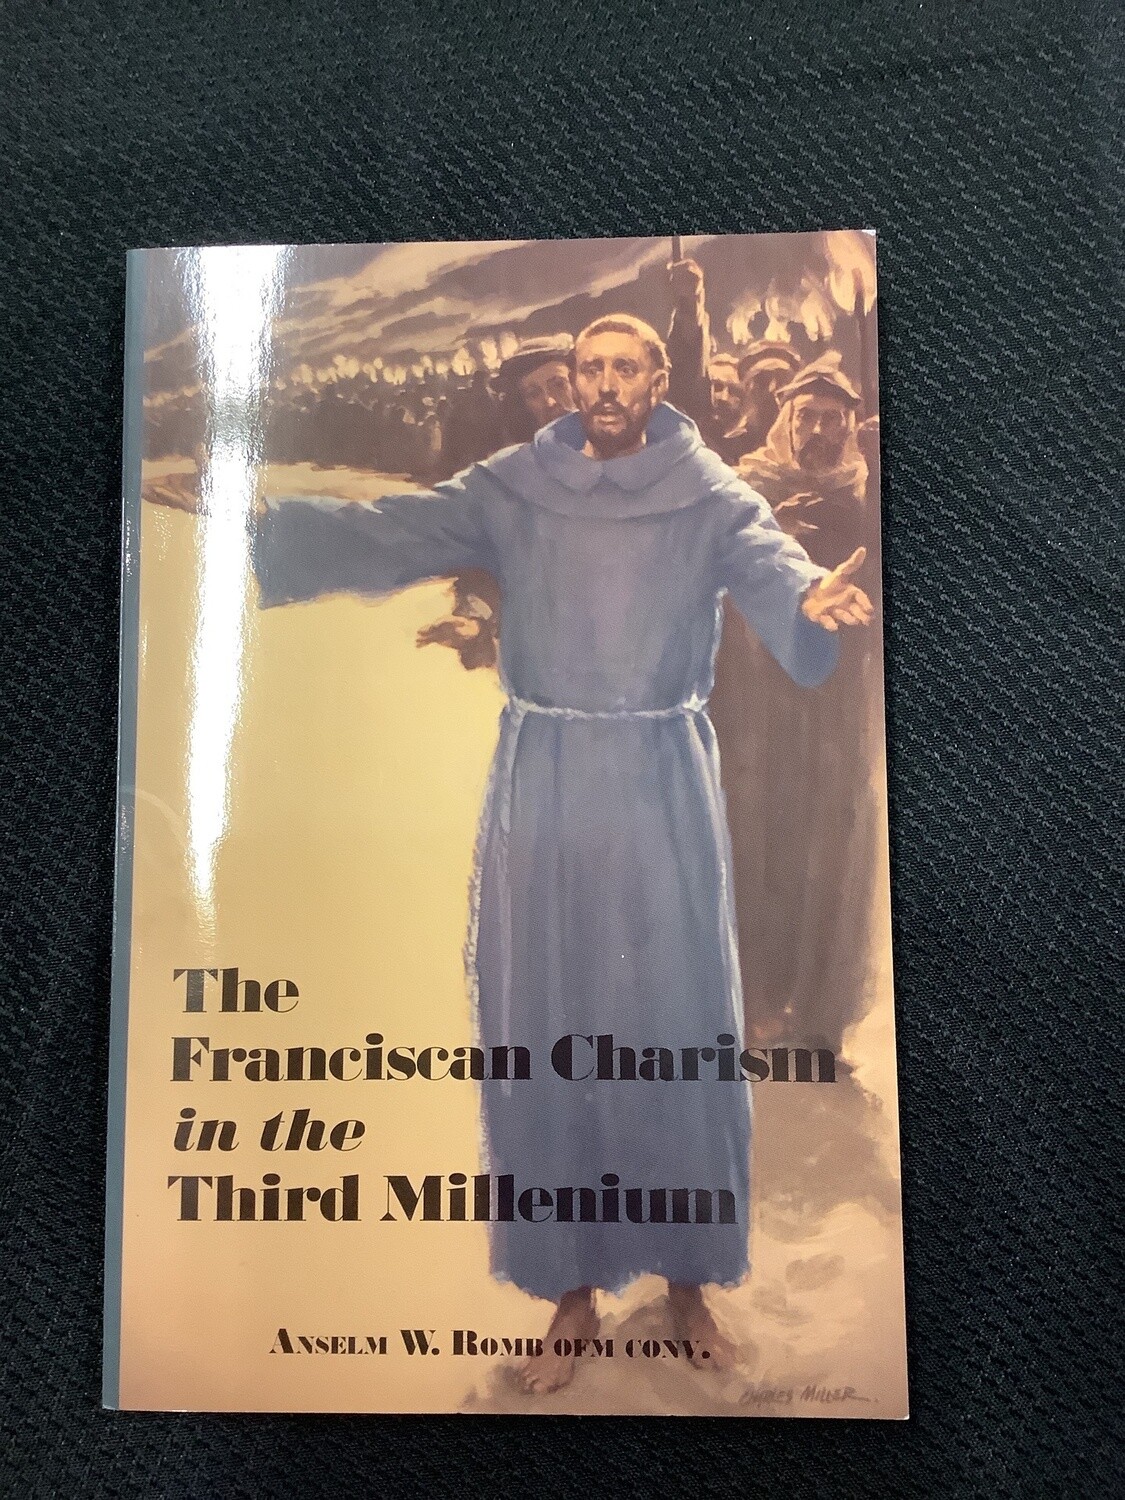 The Franciscan Charism in the Third Miklenium - Anslem W. Romb OFM Conv.